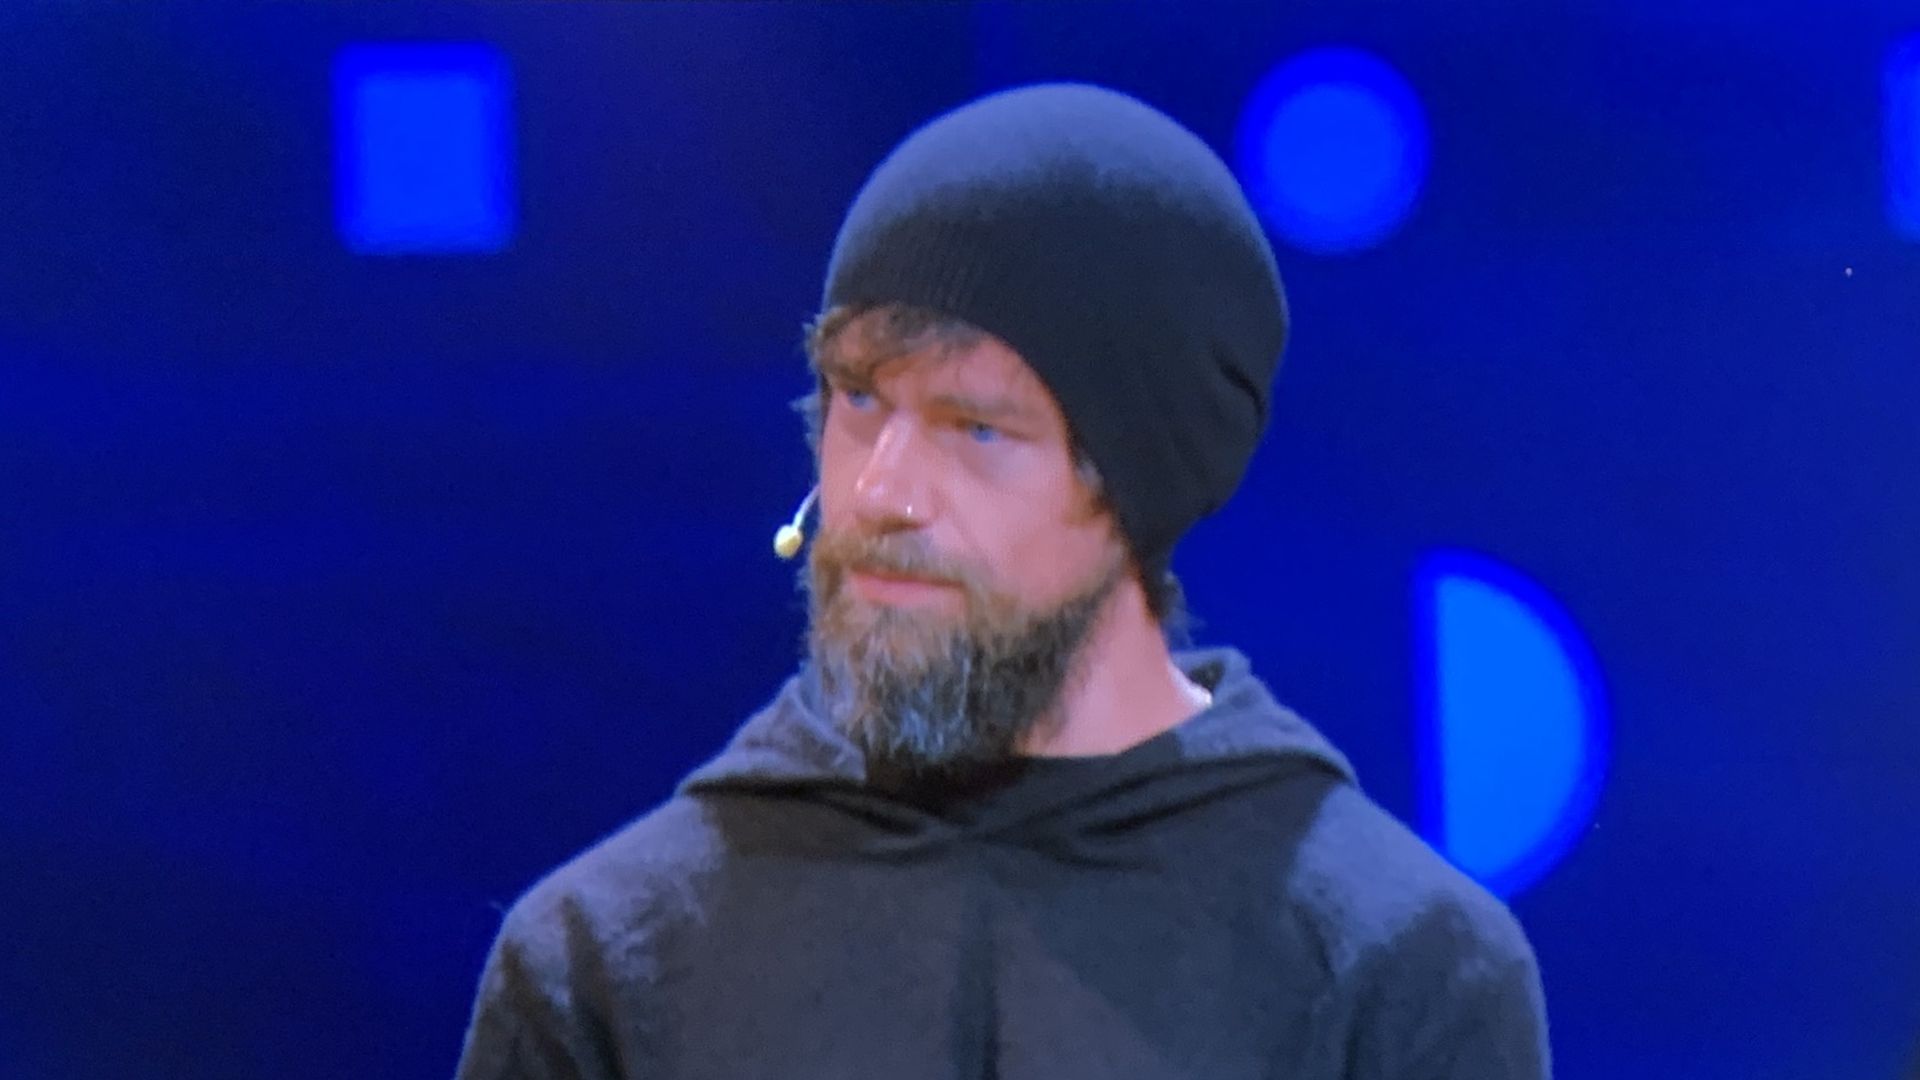 Jack Dorsey speaking at TED2019.